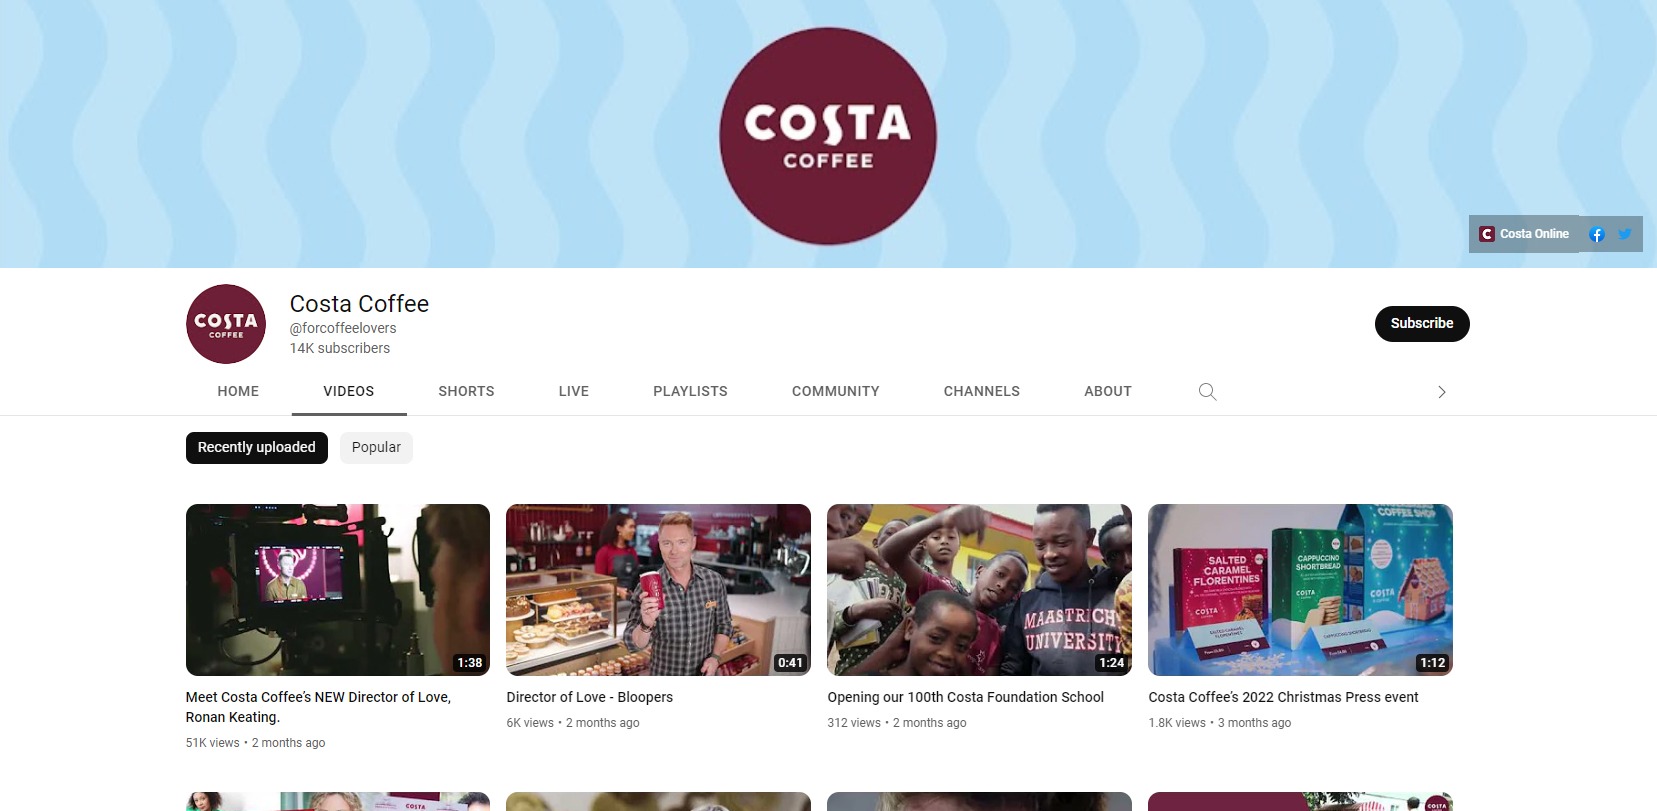 Costa Social Media - The YouTube Channel